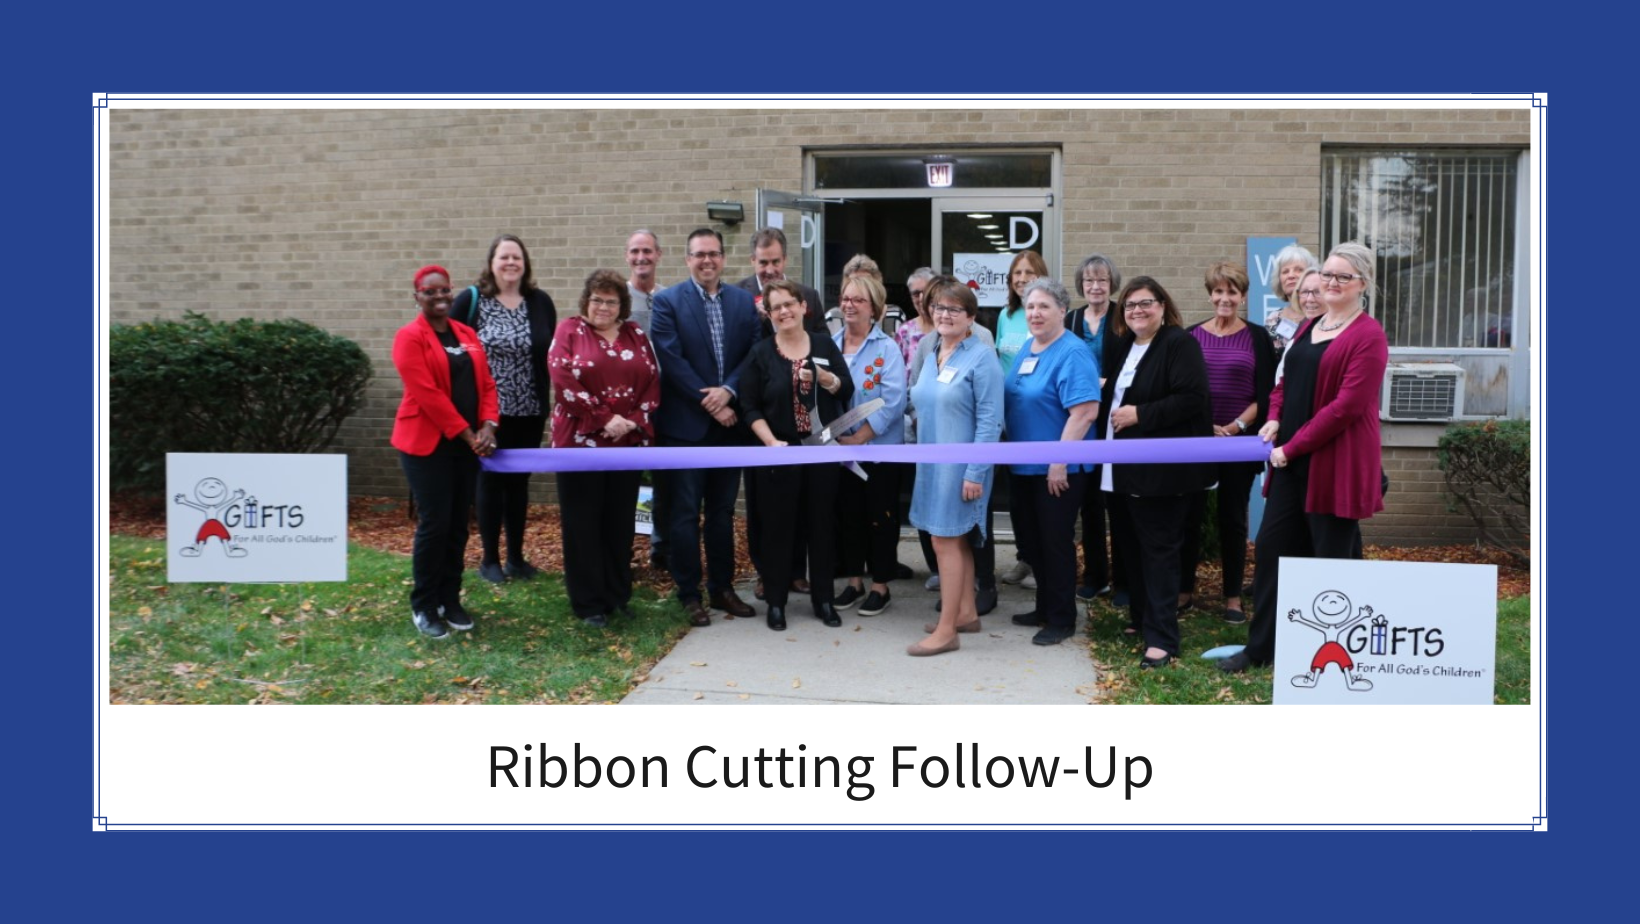 We are excited to share our Ribbon Cutting Follow-Up